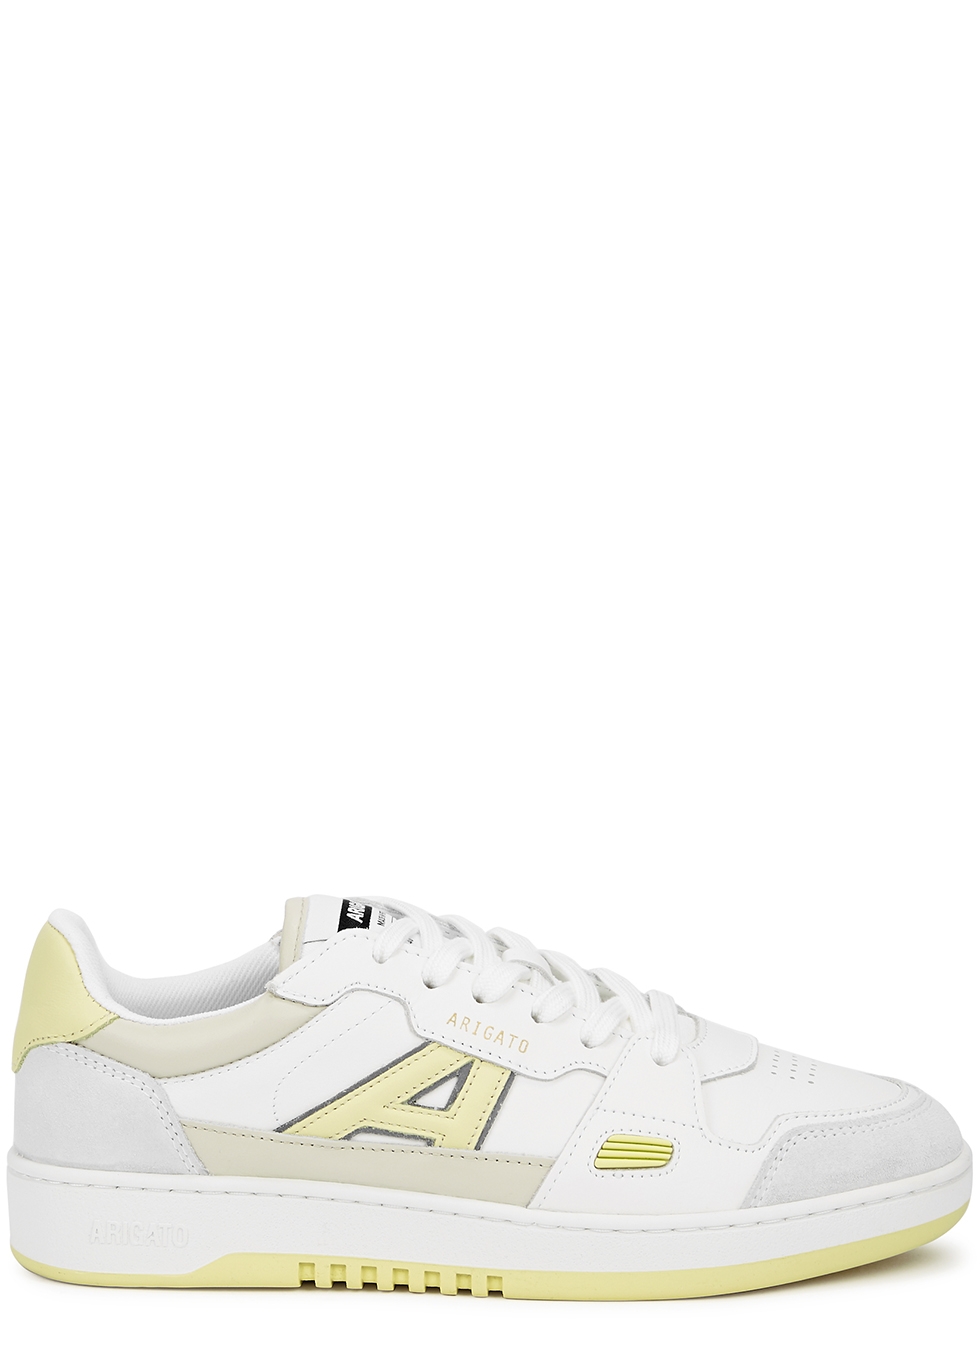 Axel Arigato A-Dice Lo panelled leather sneakers